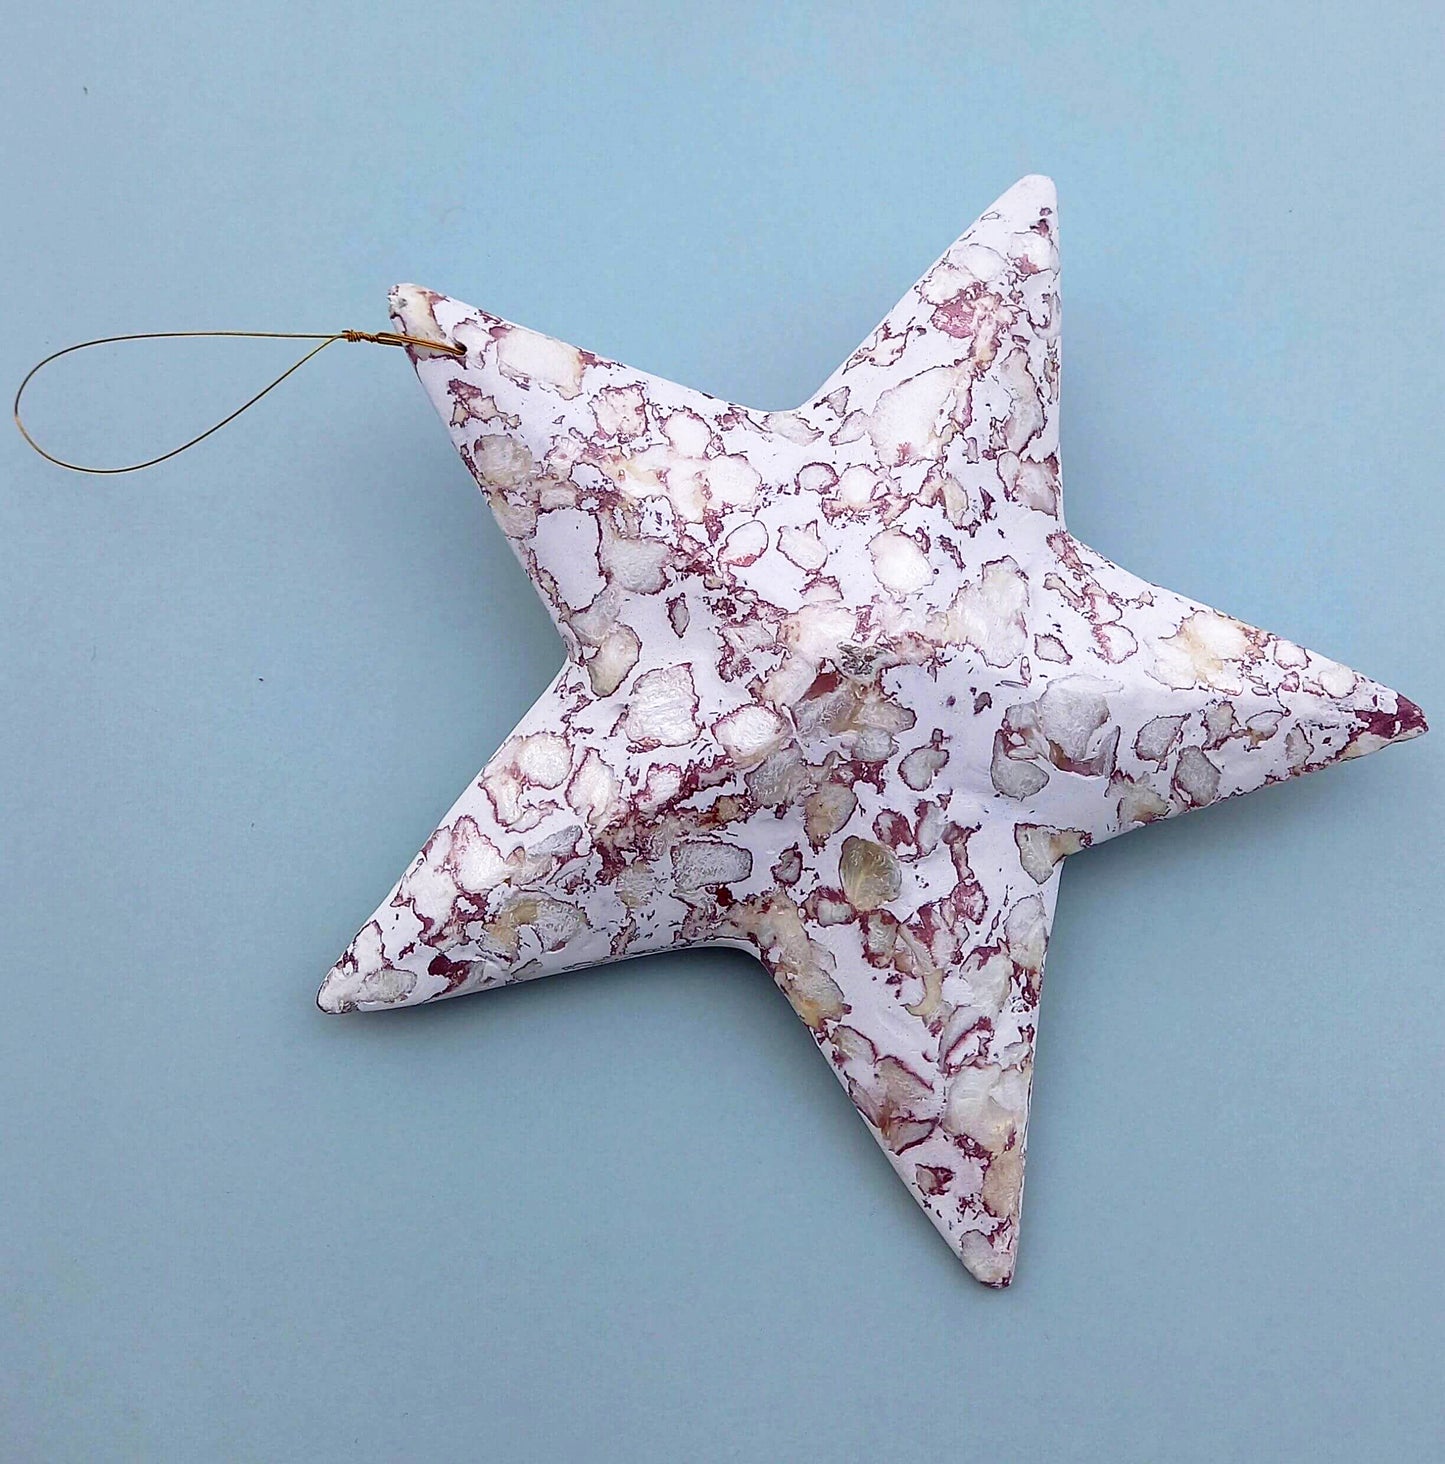 Big Christmas Star handcrafted capiz pulp - Unik by Nature